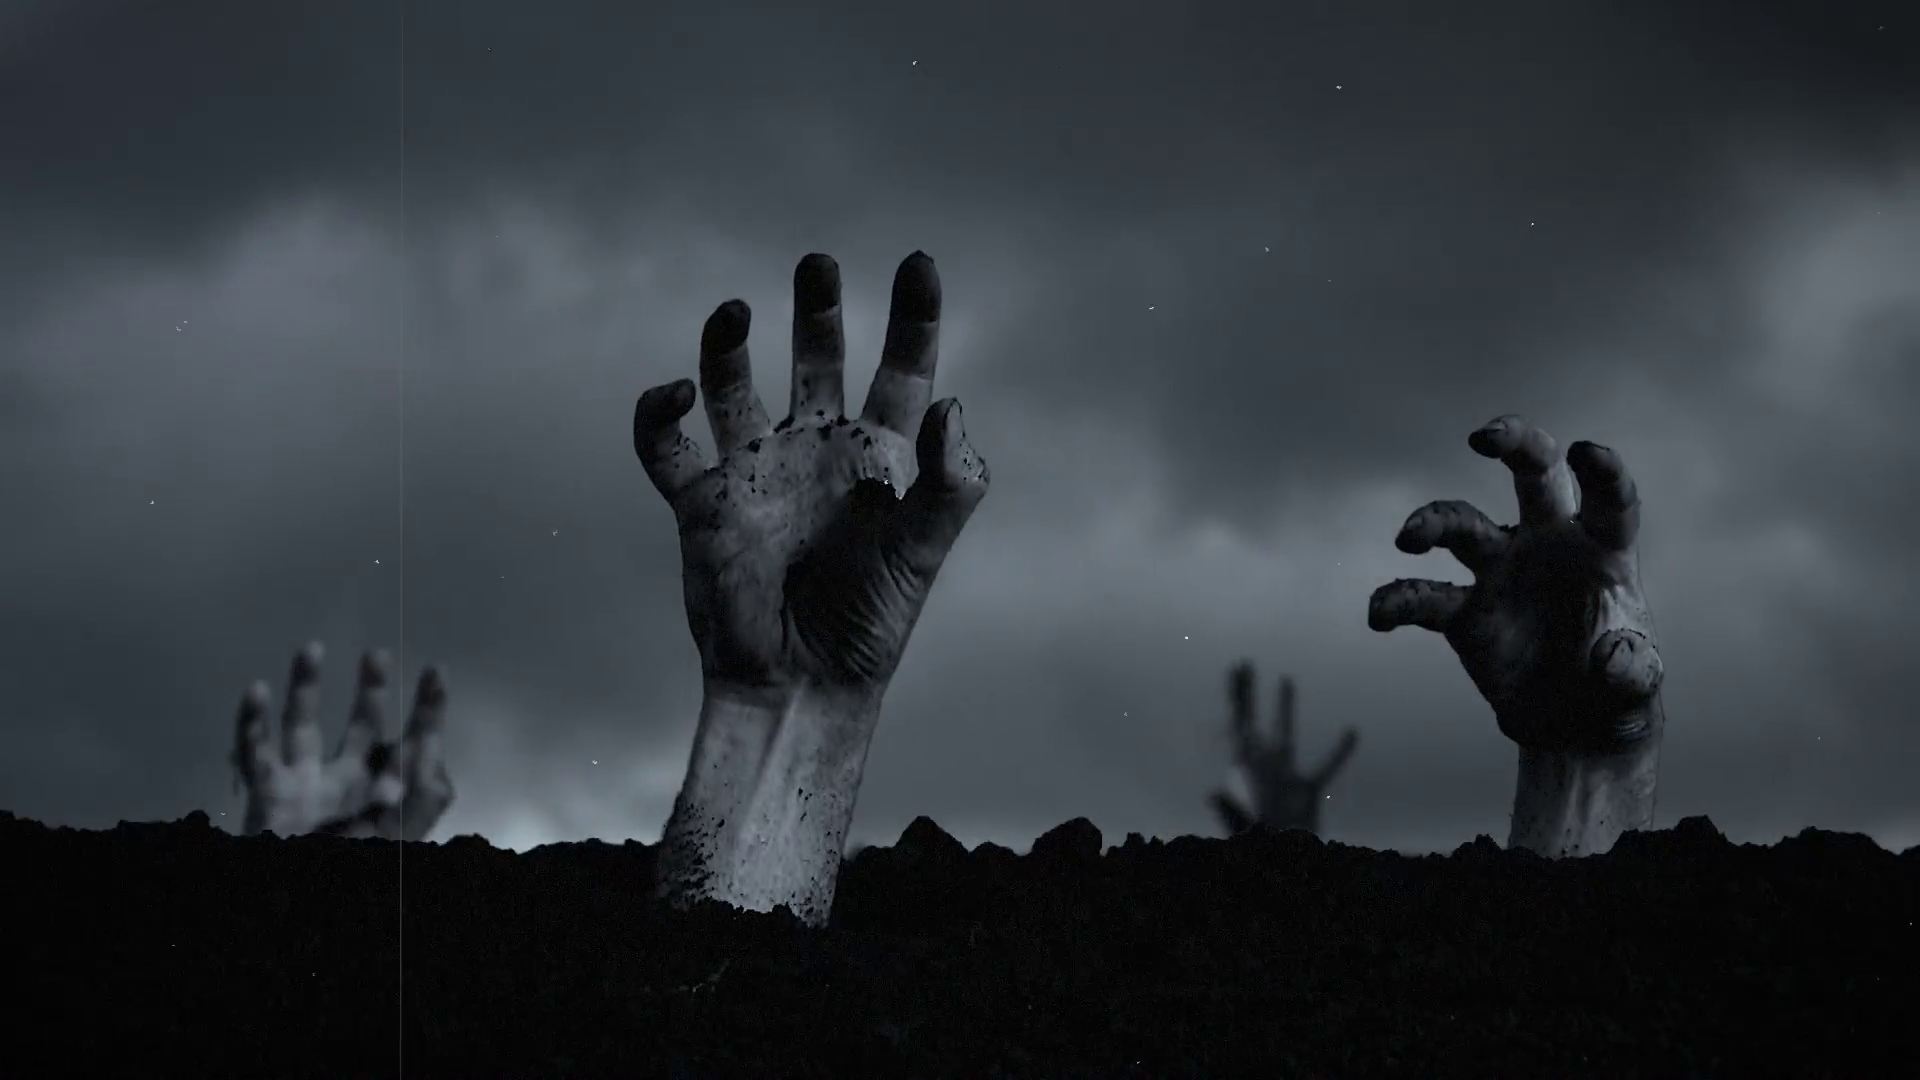 httpsfamily friendly escape roomszombie hands emerging from the grave4jxo6n6qf0010